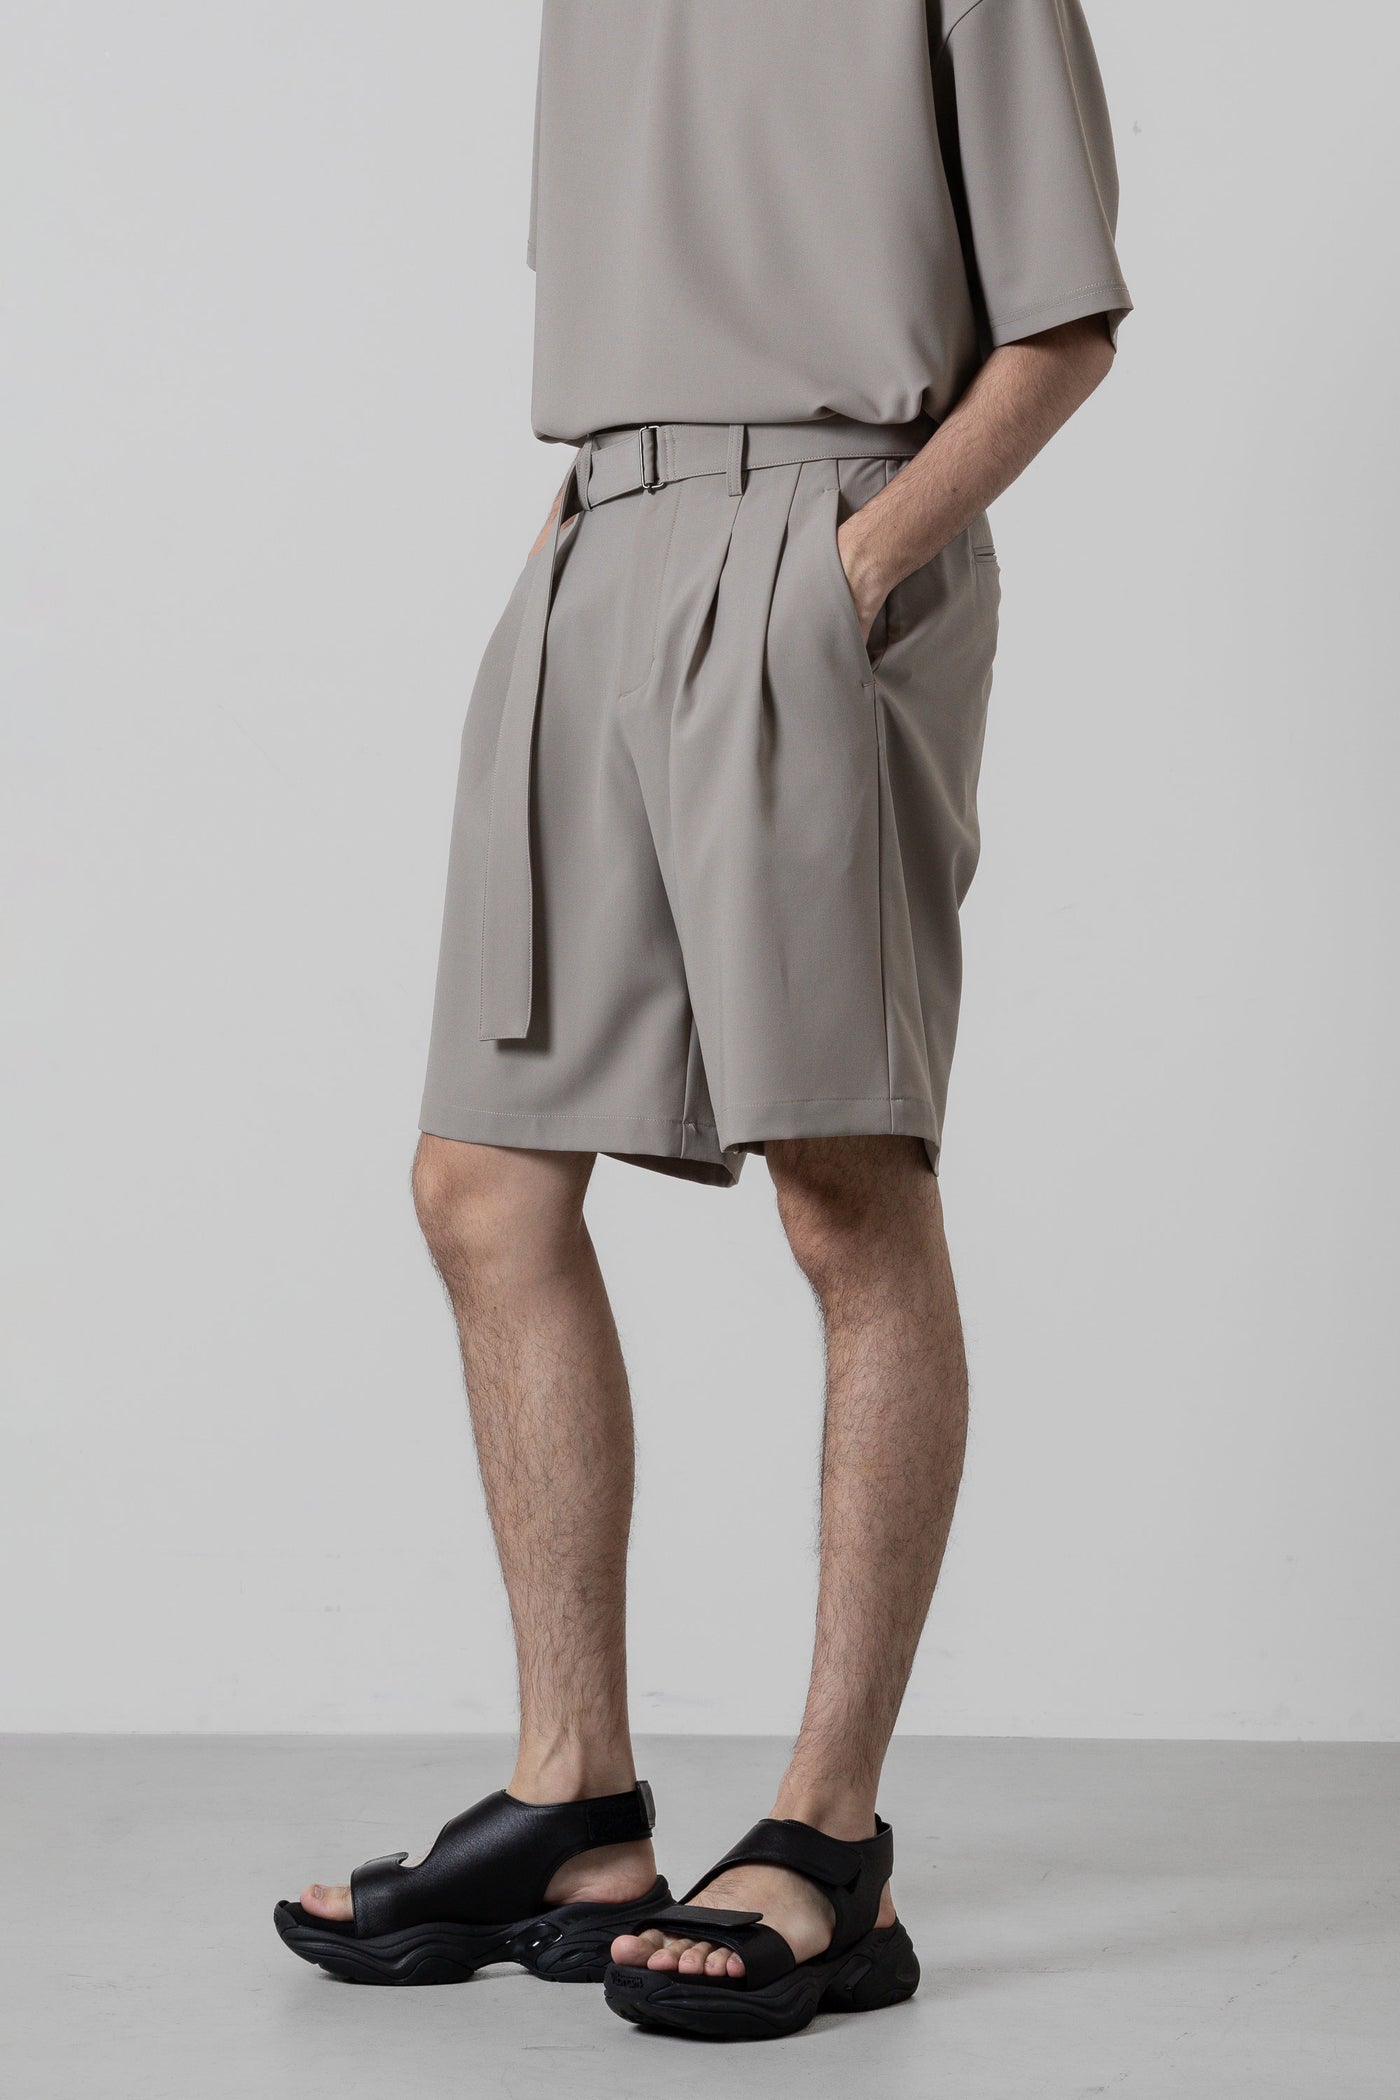 Released in February AP41-044 Polyester compact twill belted shorts